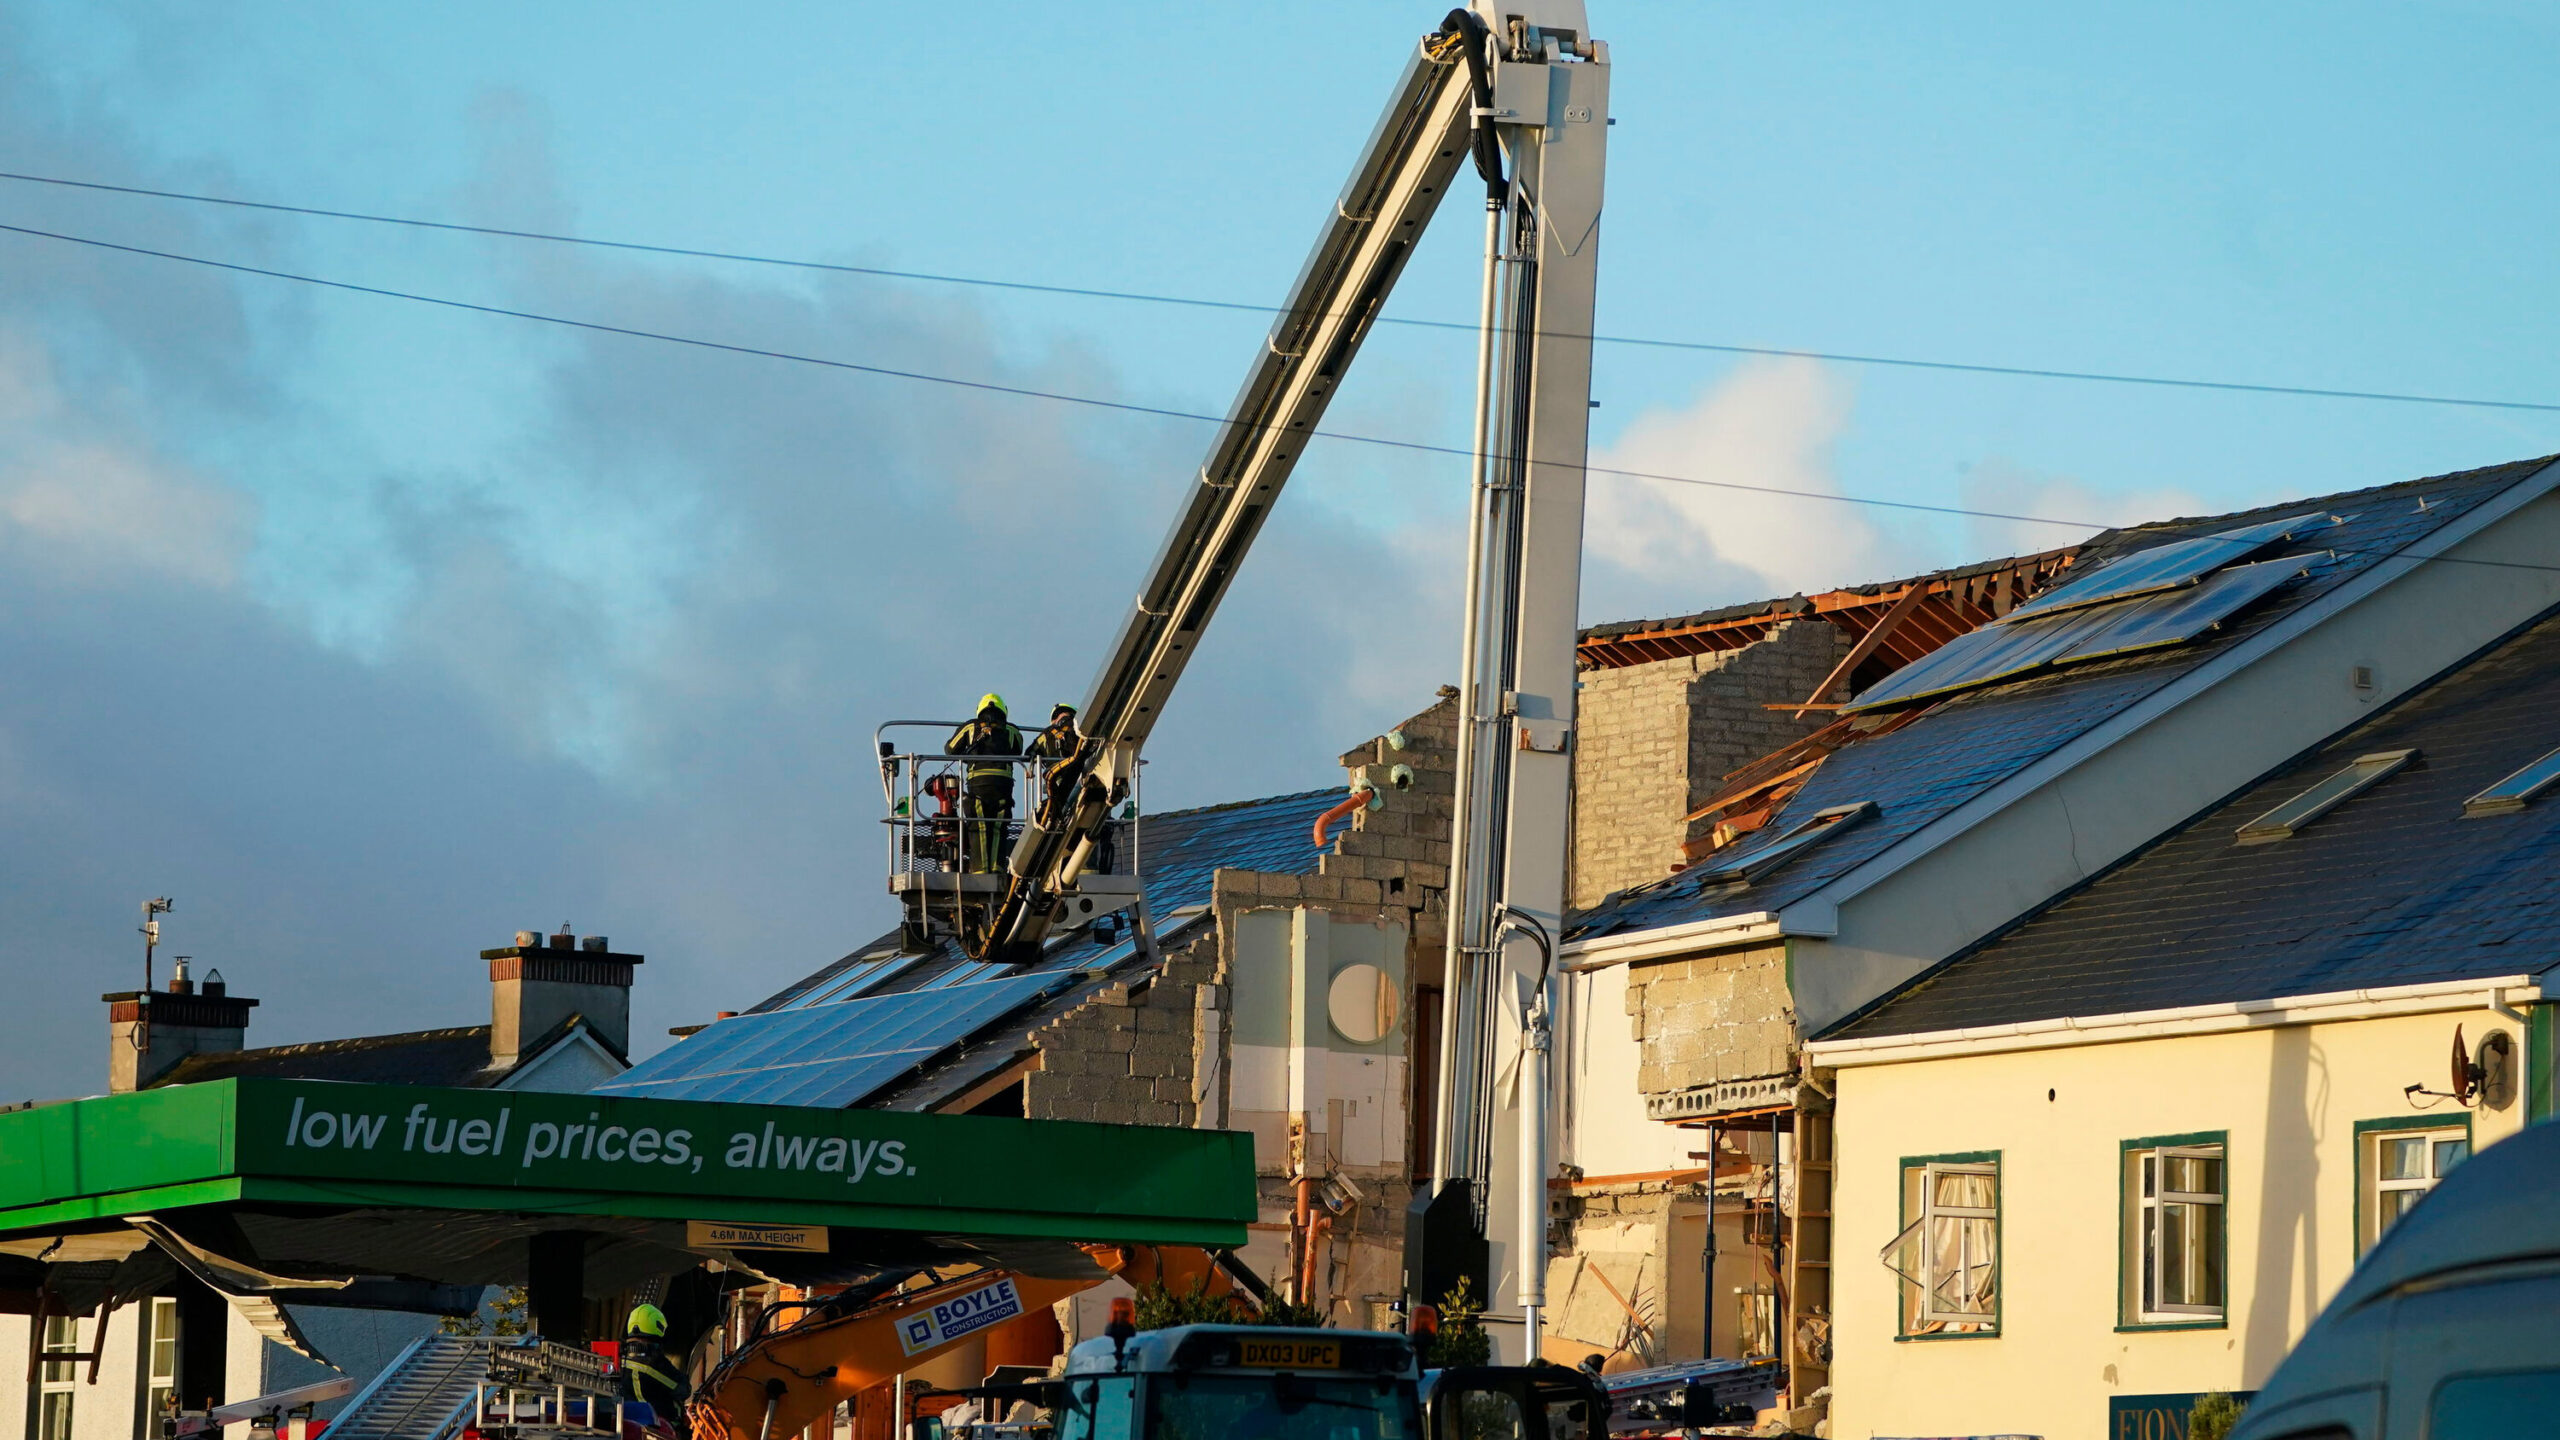 petrol station explosion on Ireland at county donegal 